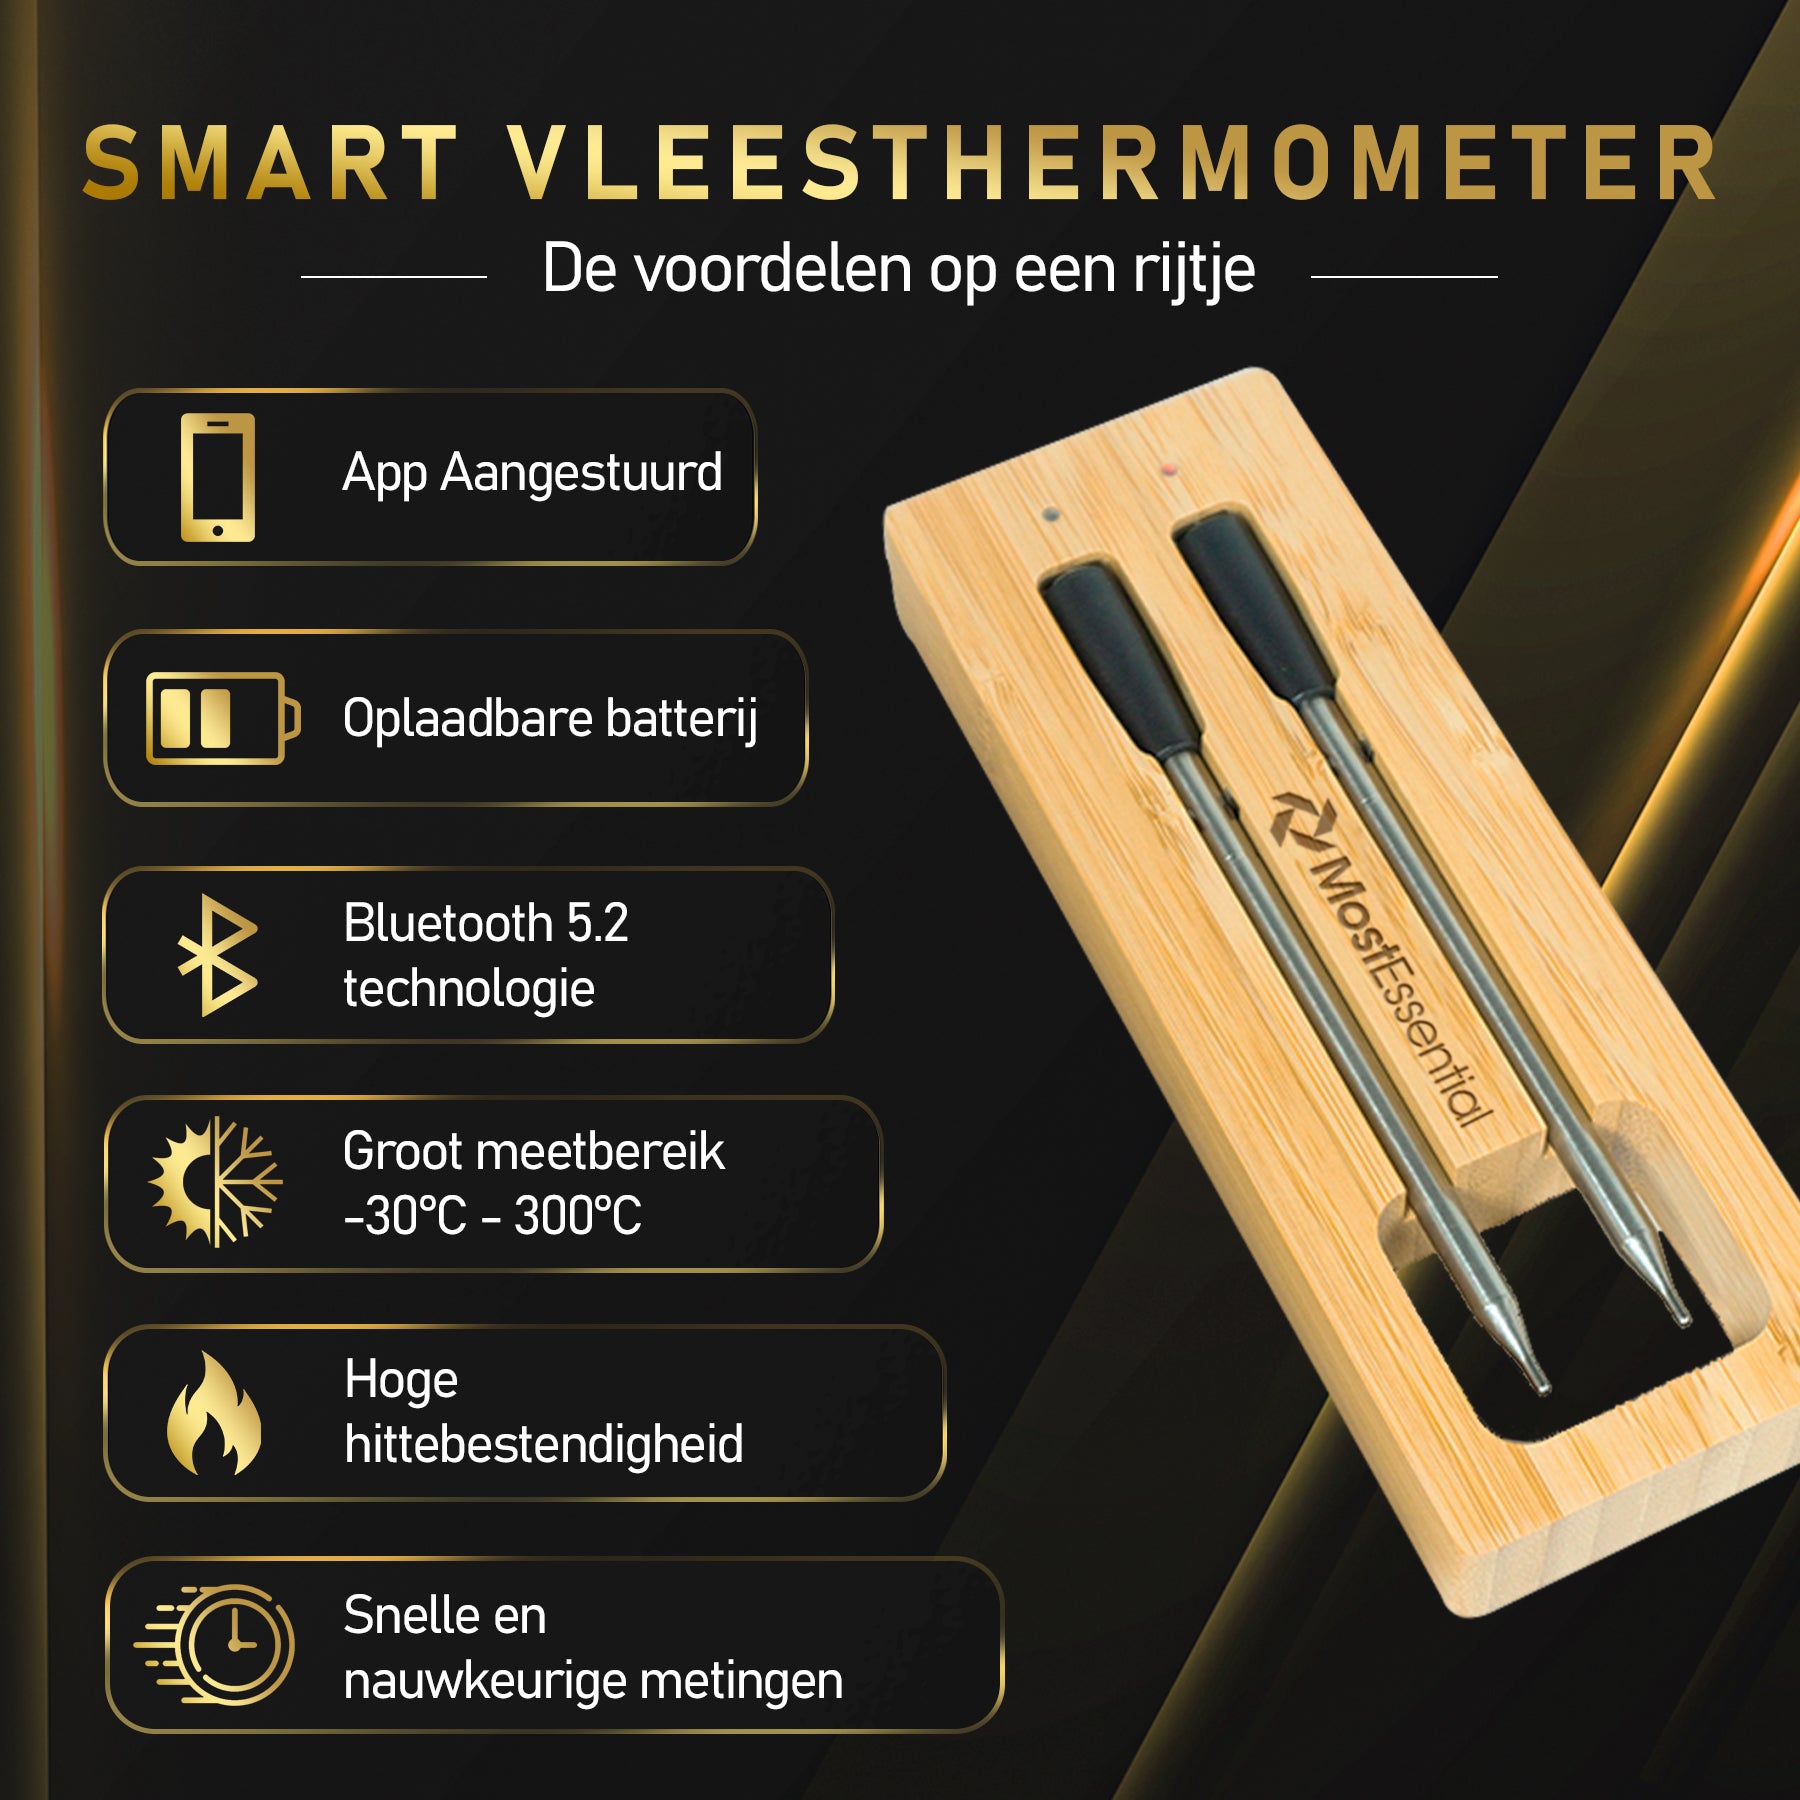 MostEssential Smart Vleesthermometer - Bluetooth 5.2 - Double Probe Edition